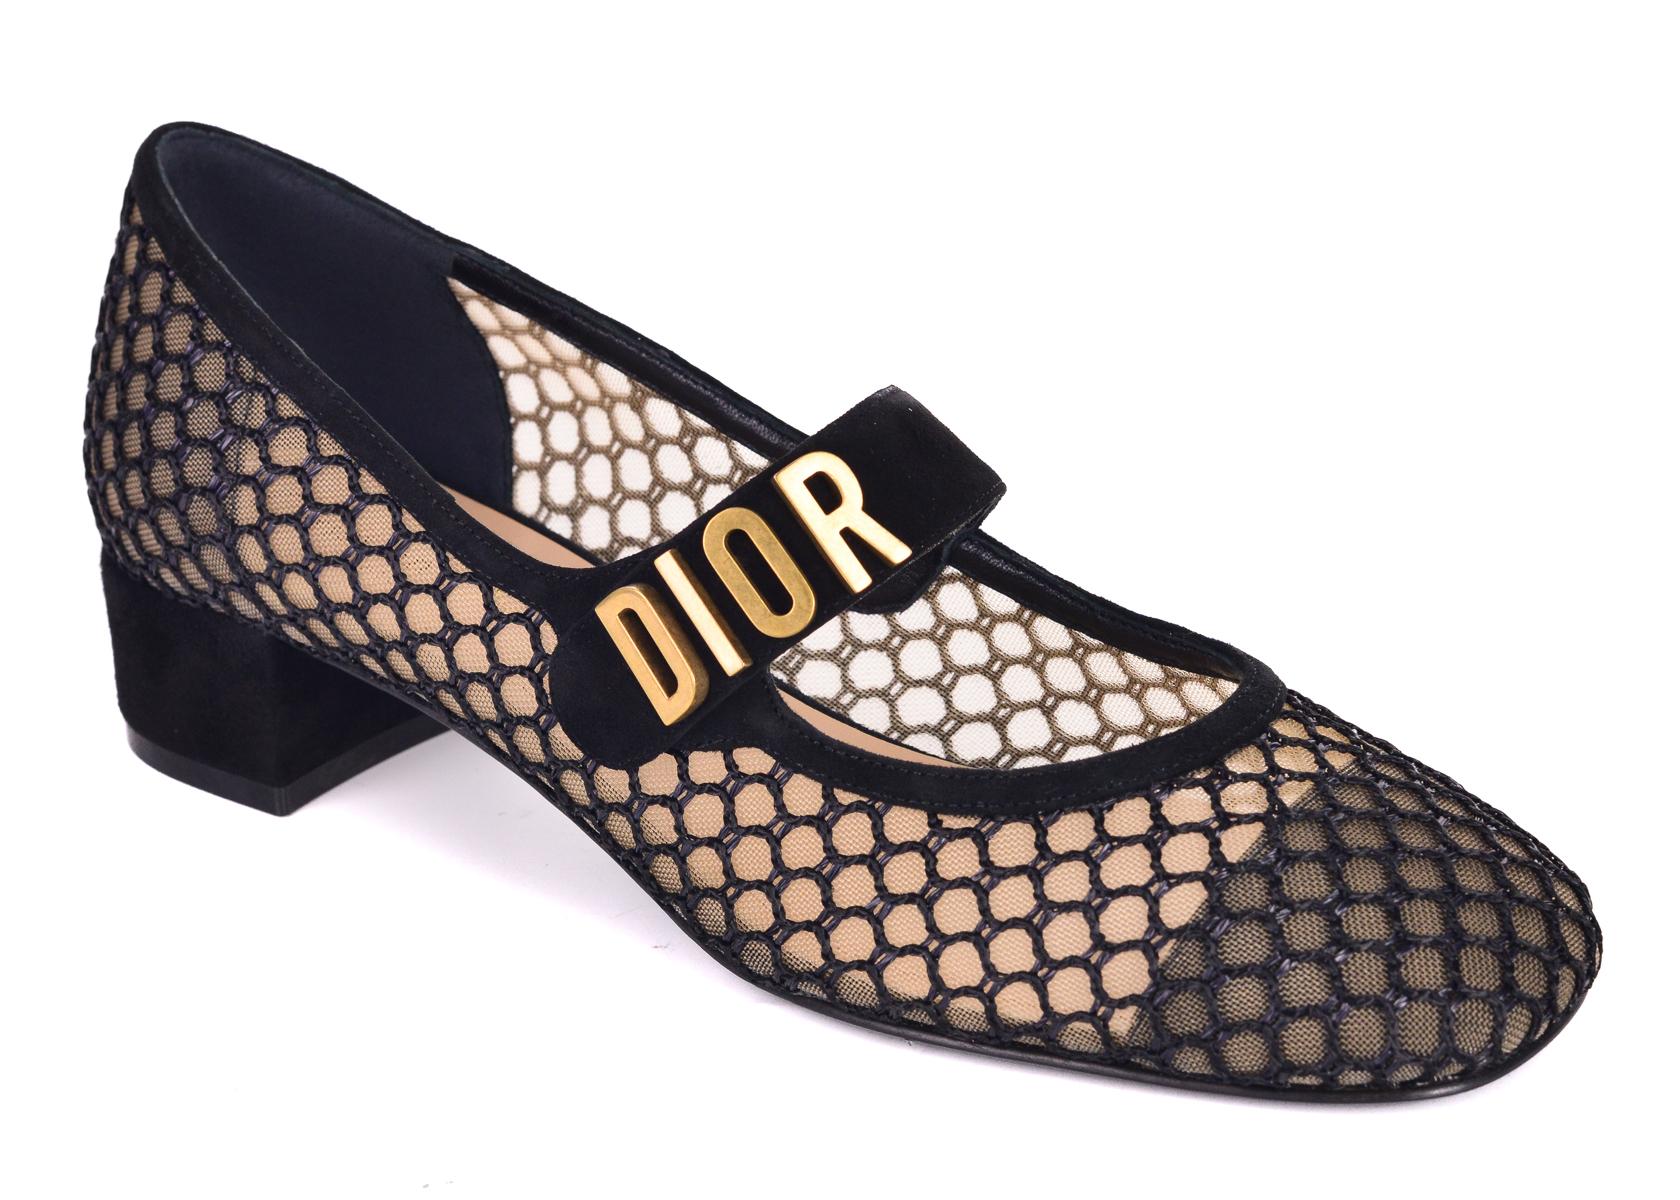 Christian Dior's Baby-D mesh pumps. These pumps feature a cap toe silhouette with mesh detailing and a Dior goldtone hardware logo. Pair with regular blue denims for a chic and sophisticated everyday look.

Christian Dior's Baby-D mesh pumps
Suede